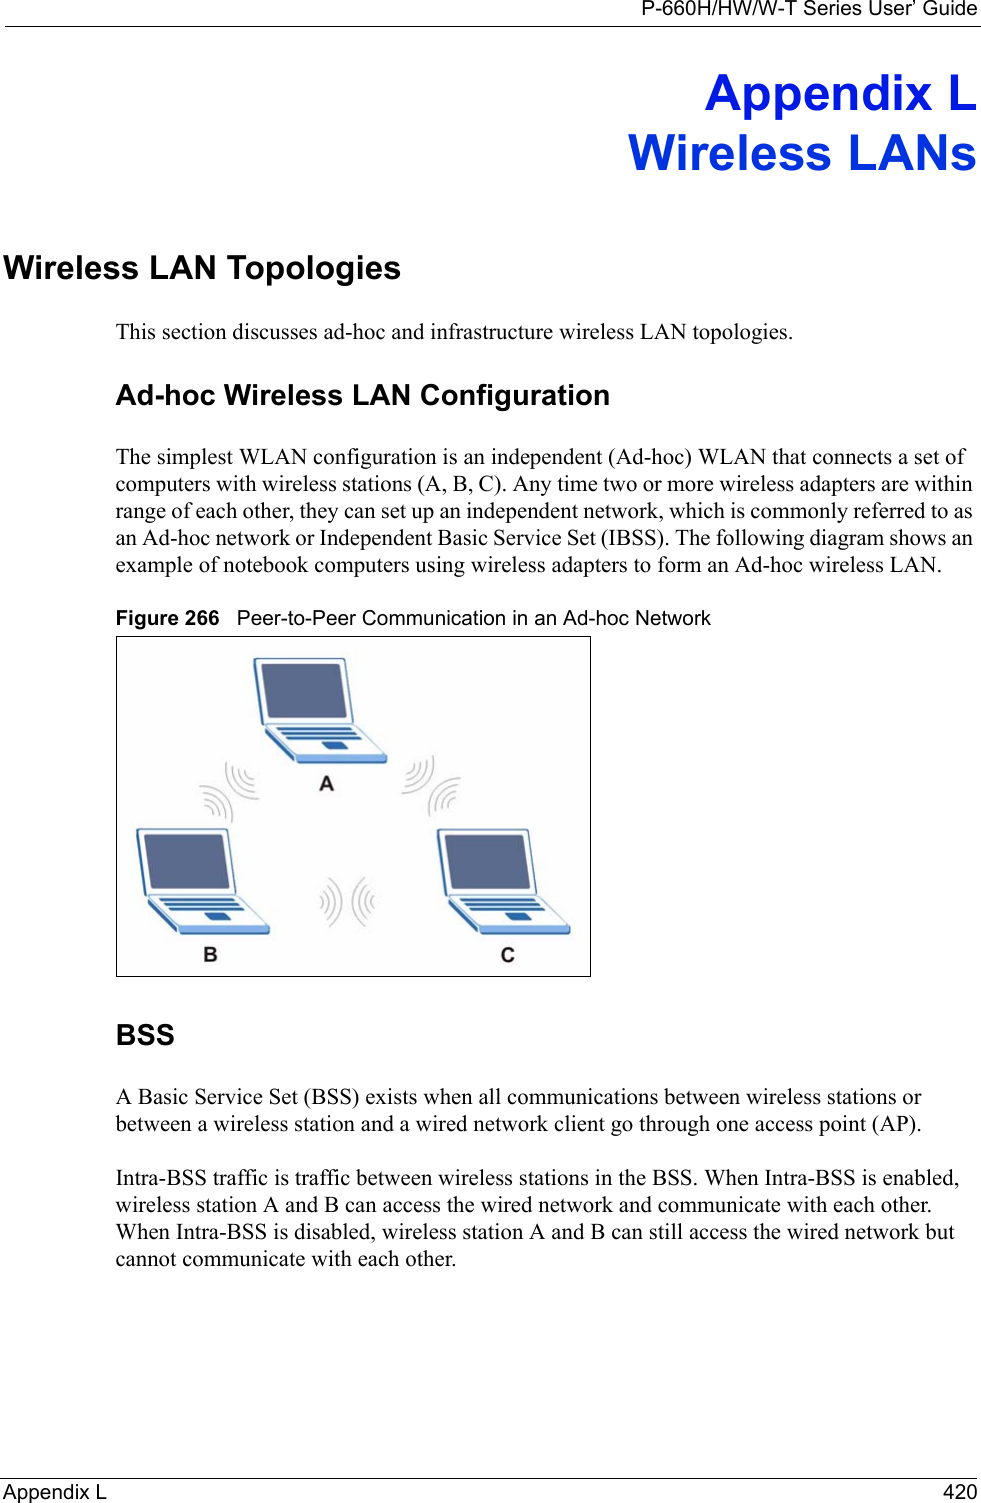 P-660H/HW/W-T Series User’ GuideAppendix L 420Appendix LWireless LANsWireless LAN TopologiesThis section discusses ad-hoc and infrastructure wireless LAN topologies.Ad-hoc Wireless LAN ConfigurationThe simplest WLAN configuration is an independent (Ad-hoc) WLAN that connects a set of computers with wireless stations (A, B, C). Any time two or more wireless adapters are within range of each other, they can set up an independent network, which is commonly referred to as an Ad-hoc network or Independent Basic Service Set (IBSS). The following diagram shows an example of notebook computers using wireless adapters to form an Ad-hoc wireless LAN. Figure 266   Peer-to-Peer Communication in an Ad-hoc NetworkBSSA Basic Service Set (BSS) exists when all communications between wireless stations or between a wireless station and a wired network client go through one access point (AP). Intra-BSS traffic is traffic between wireless stations in the BSS. When Intra-BSS is enabled, wireless station A and B can access the wired network and communicate with each other. When Intra-BSS is disabled, wireless station A and B can still access the wired network but cannot communicate with each other.